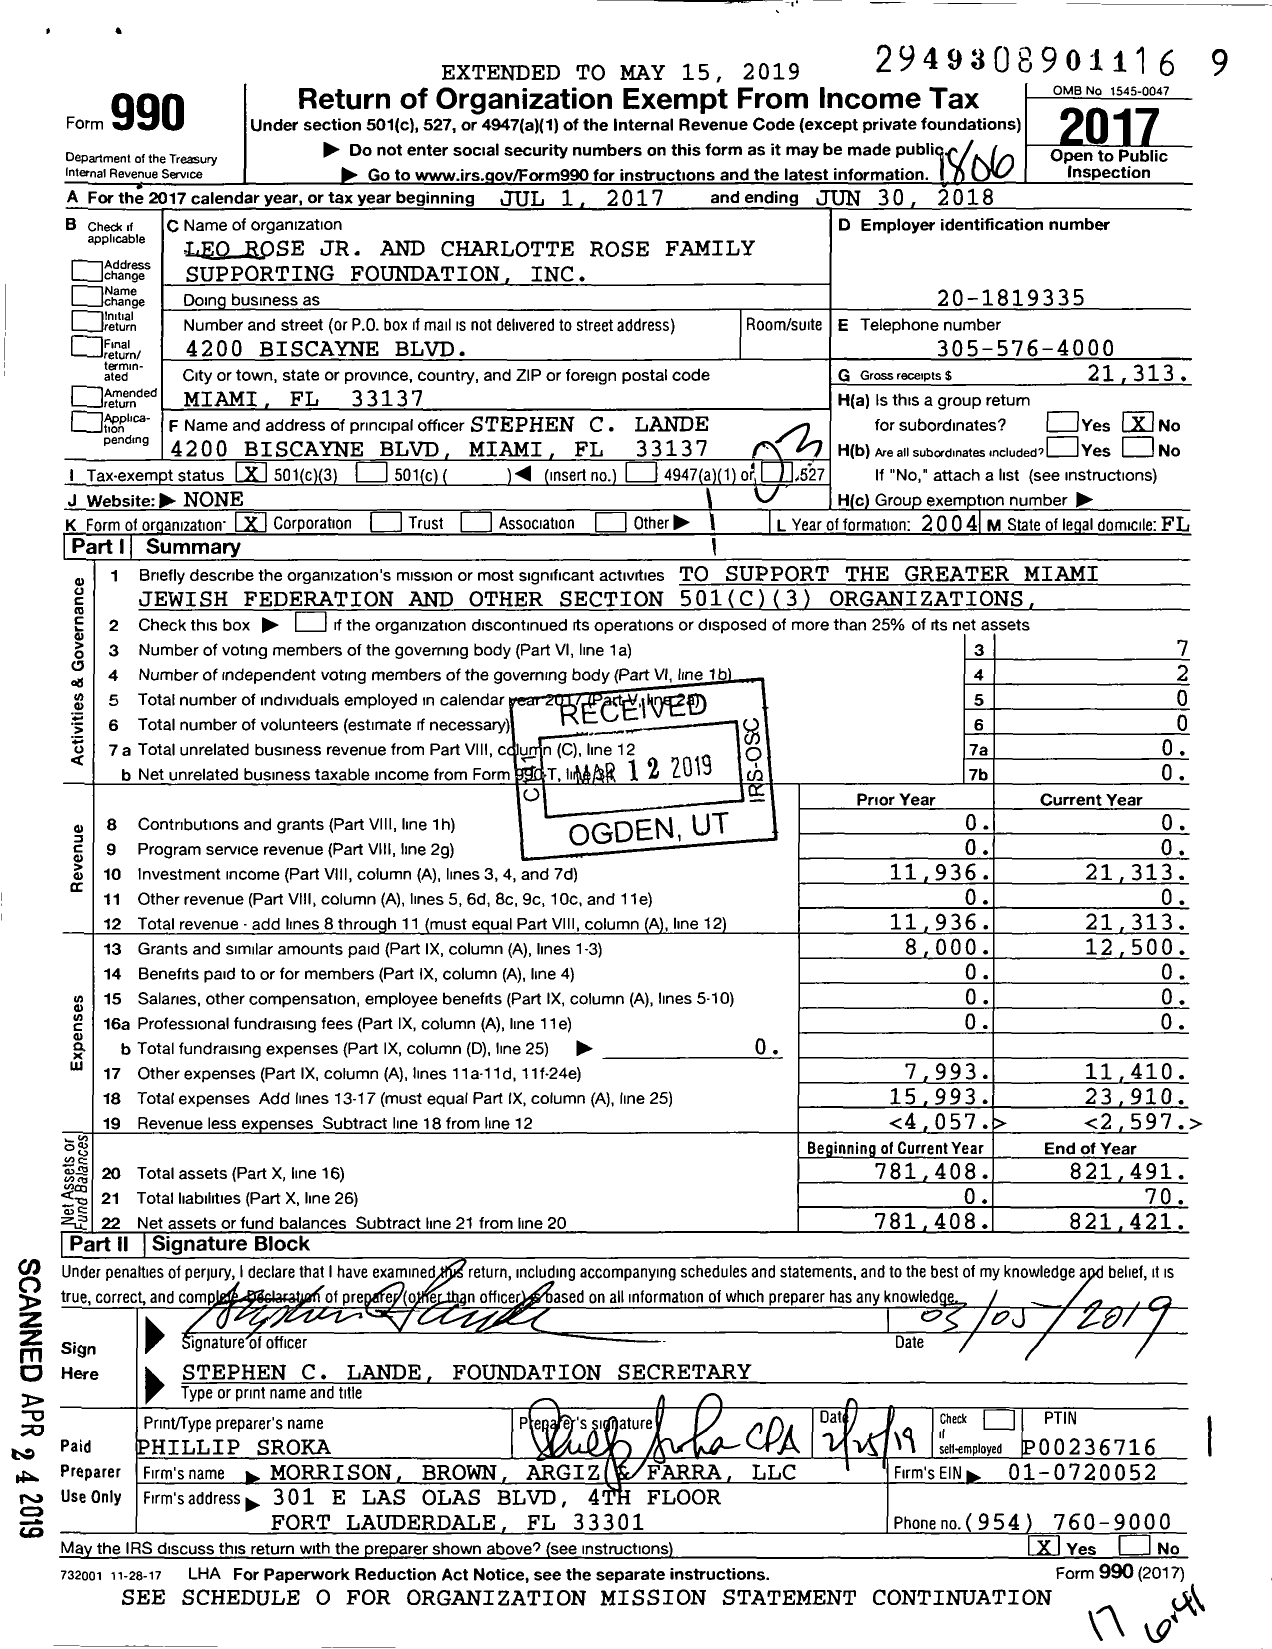 Image of first page of 2017 Form 990 for Leo Rose Jr and Charlotte Rose Family Supporting Foundation